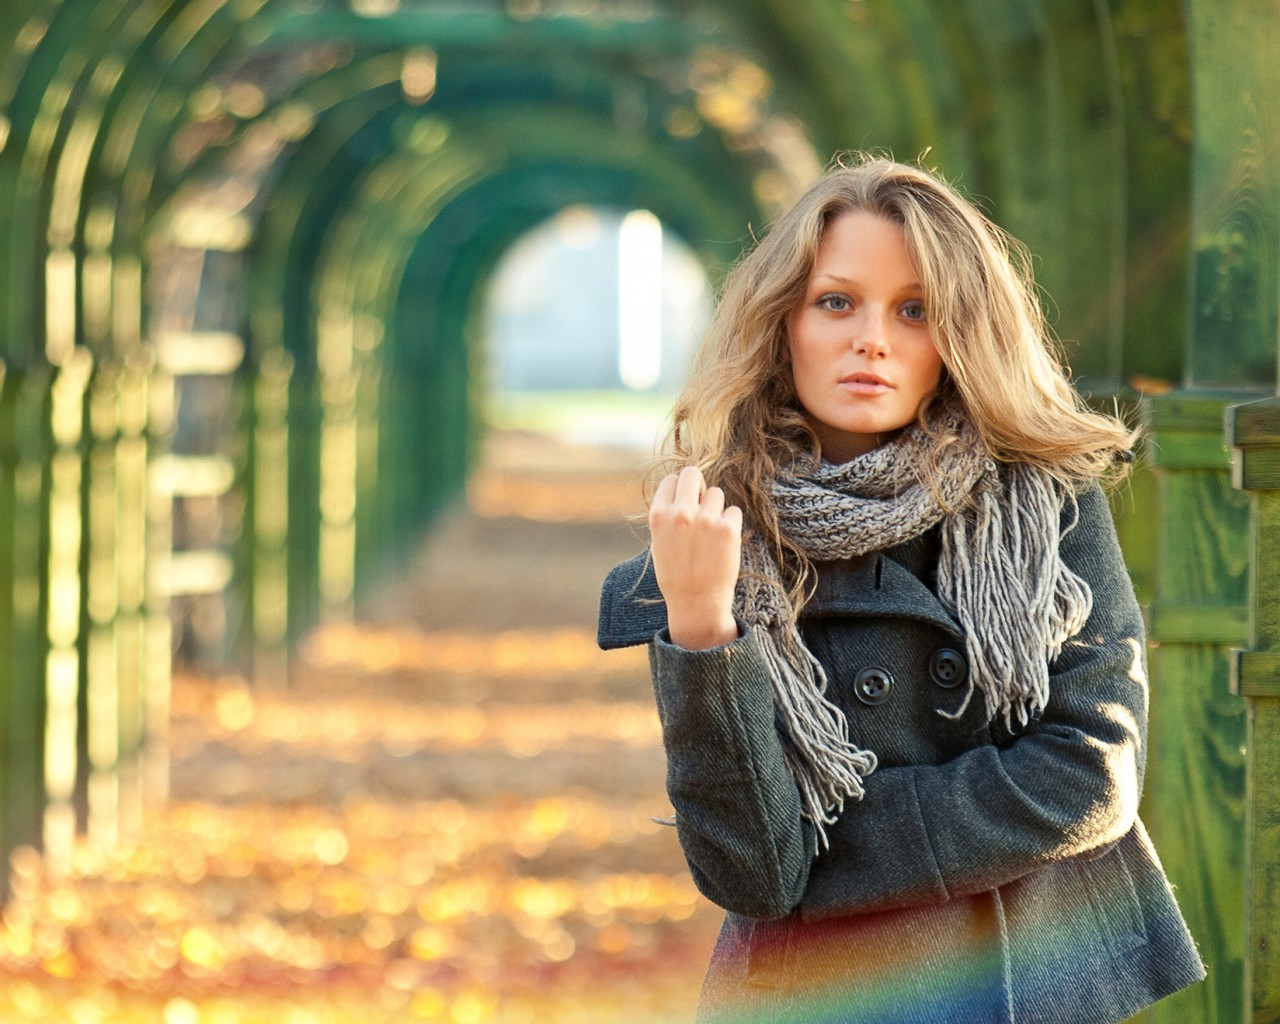 Rocking Fall Fashion Scarves Styles to Contemplate